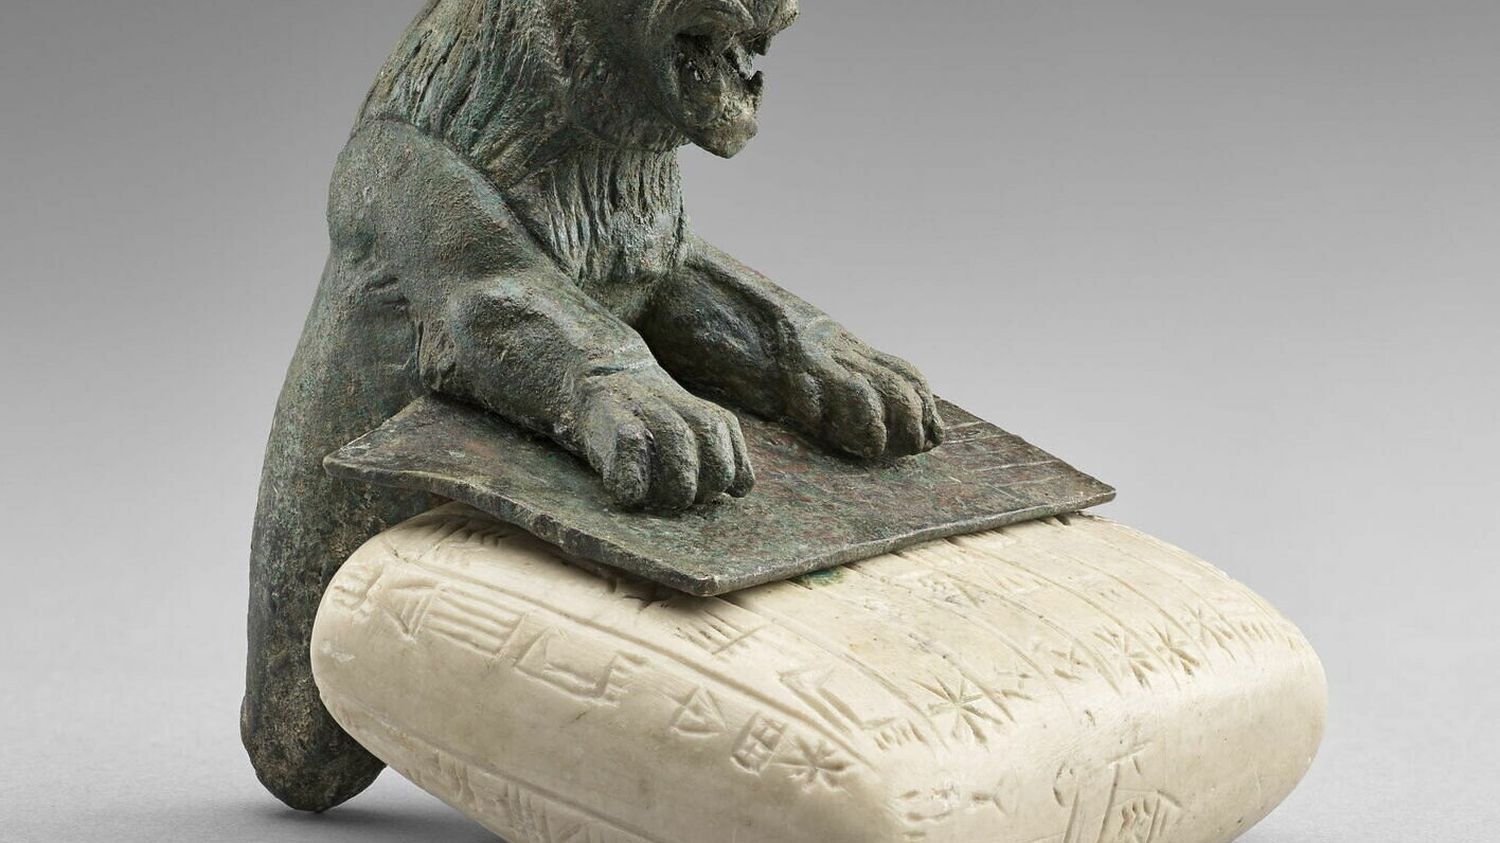 The Louvre welcomes rare oriental antiquities from the New York Met, which is currently being restored